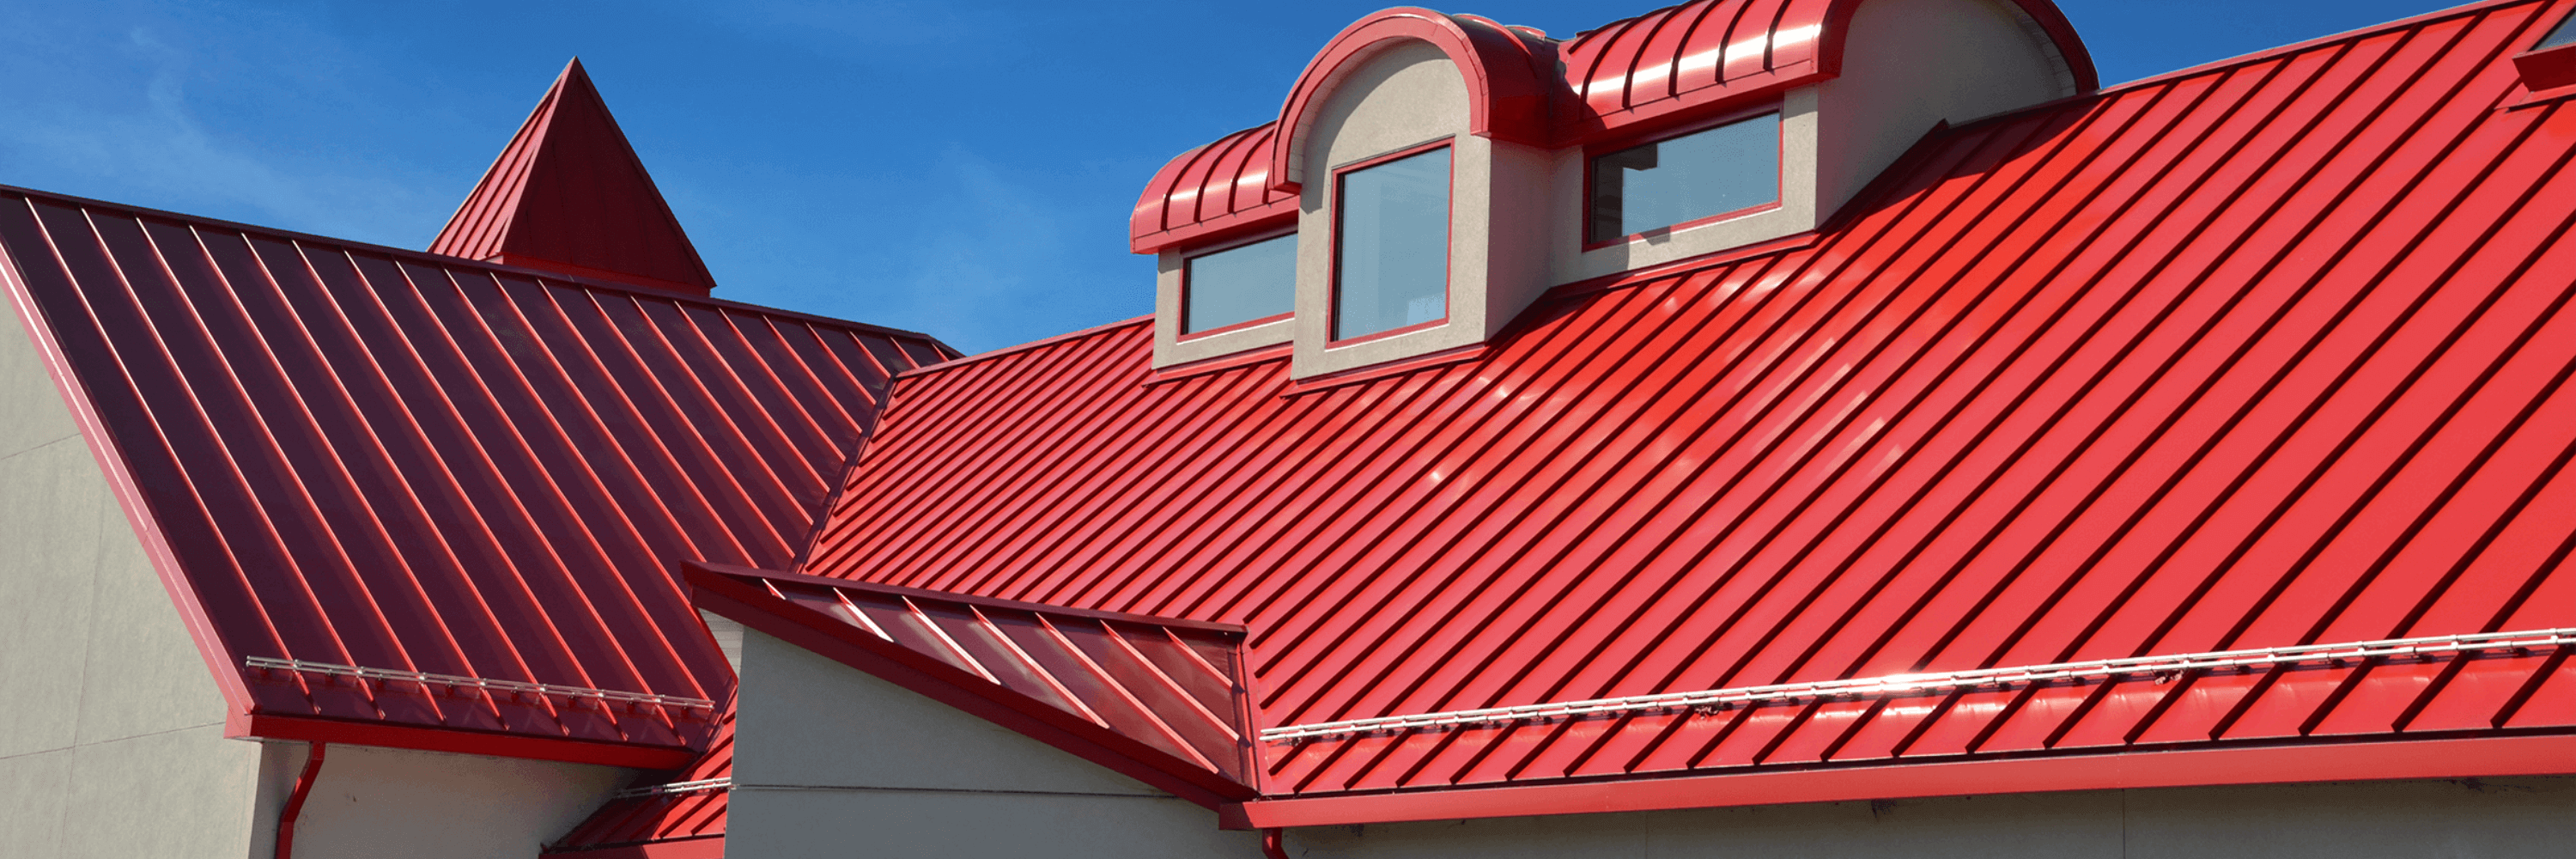 Everloc by Everlast Roofing